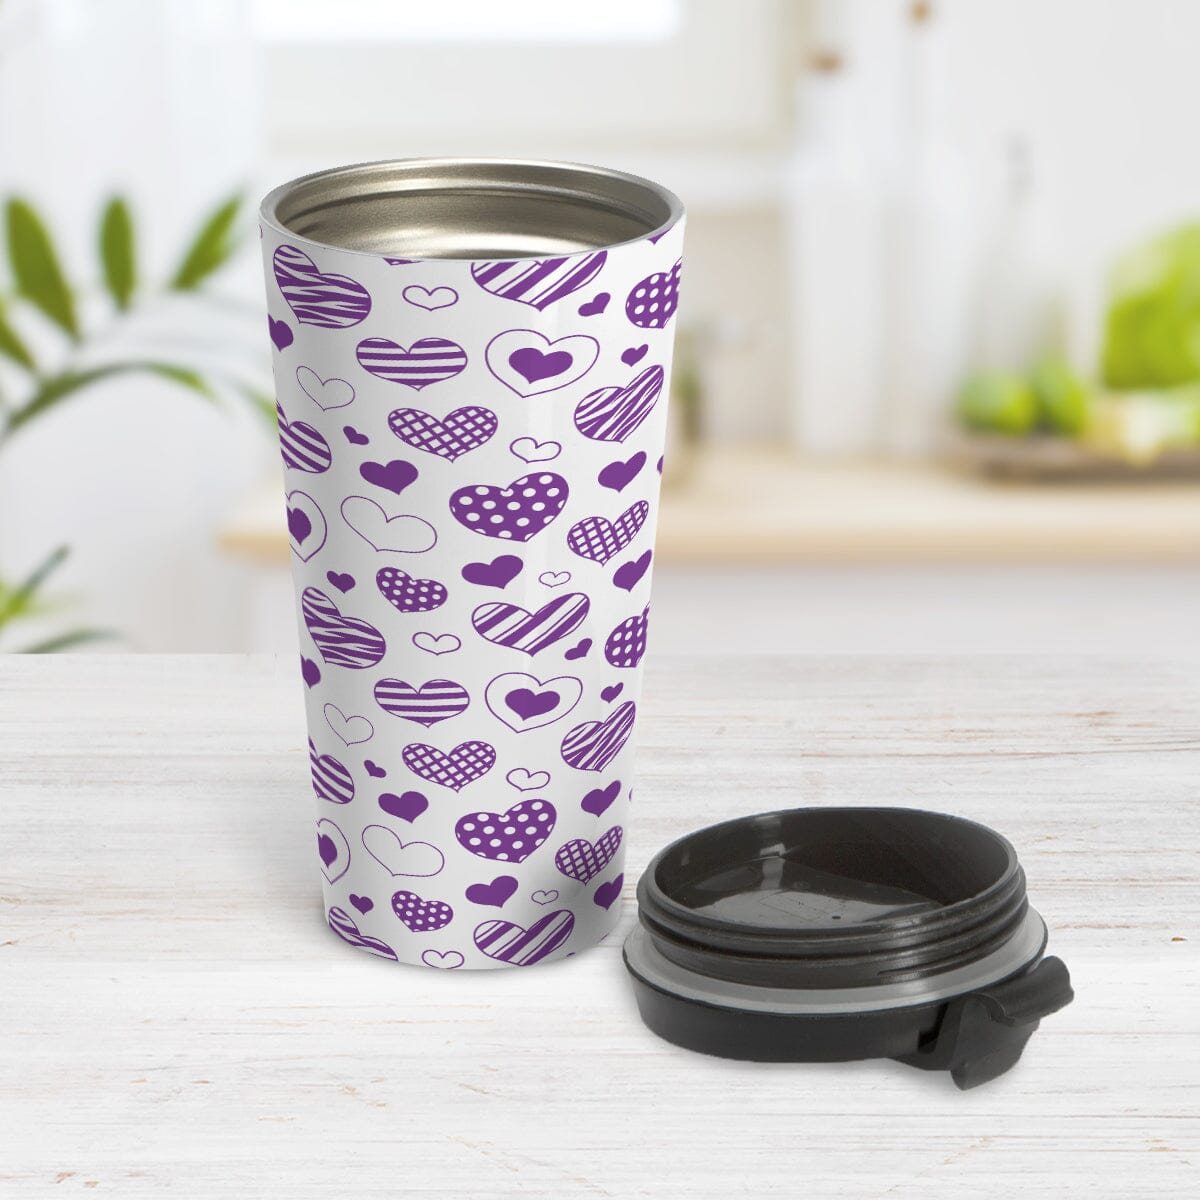 Purple Heart Doodles Travel Mug (15oz) at Amy's Coffee Mugs. A stainless steel travel mug designed with hand-drawn purple heart doodles in a pattern that wraps around the travel mug. This cute heart pattern is perfect for Valentine's Day or for anyone who loves hearts and young-at-heart drawings. Photo shows the travel mug open with the lid on the table beside it.